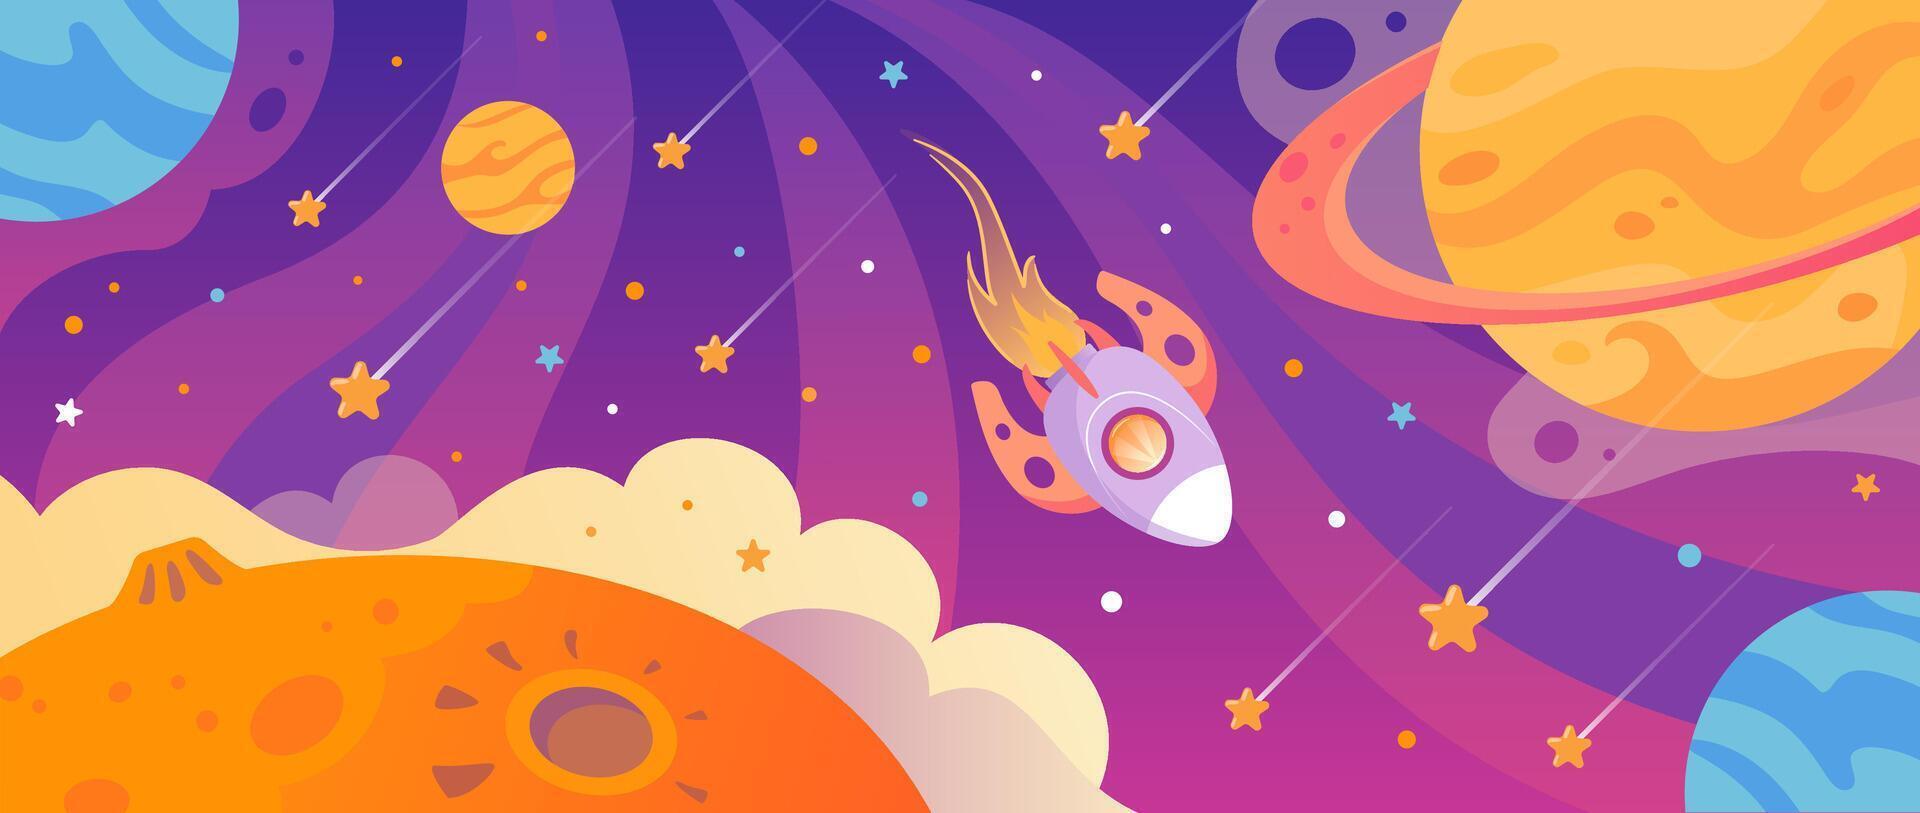 A rocket flying among planets and stars. Space landscape, shuttle, UFO, future. Cute baby horizontal illustration in vintage cartoon style. For childrens, posters, postcards, banners, design elements. vector